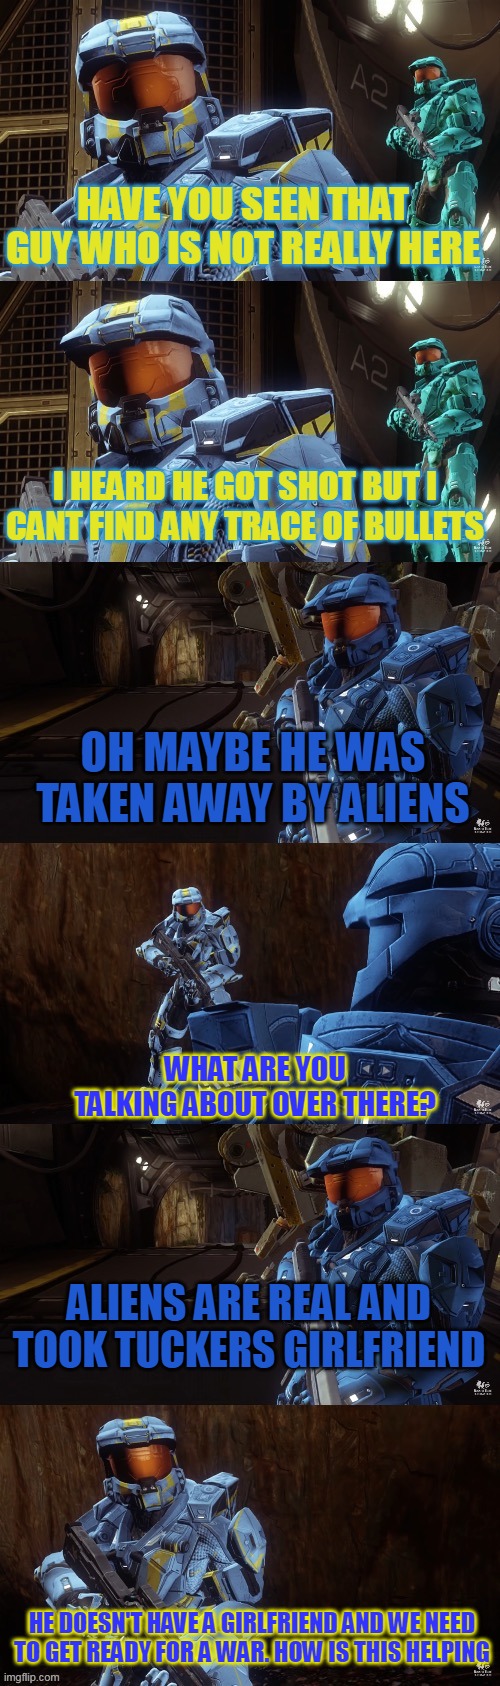 RVB random chat | HAVE YOU SEEN THAT GUY WHO IS NOT REALLY HERE; I HEARD HE GOT SHOT BUT I CANT FIND ANY TRACE OF BULLETS; OH MAYBE HE WAS TAKEN AWAY BY ALIENS; WHAT ARE YOU TALKING ABOUT OVER THERE? ALIENS ARE REAL AND TOOK TUCKERS GIRLFRIEND; HE DOESN'T HAVE A GIRLFRIEND AND WE NEED TO GET READY FOR A WAR. HOW IS THIS HELPING | image tagged in yeah i don't see your point | made w/ Imgflip meme maker